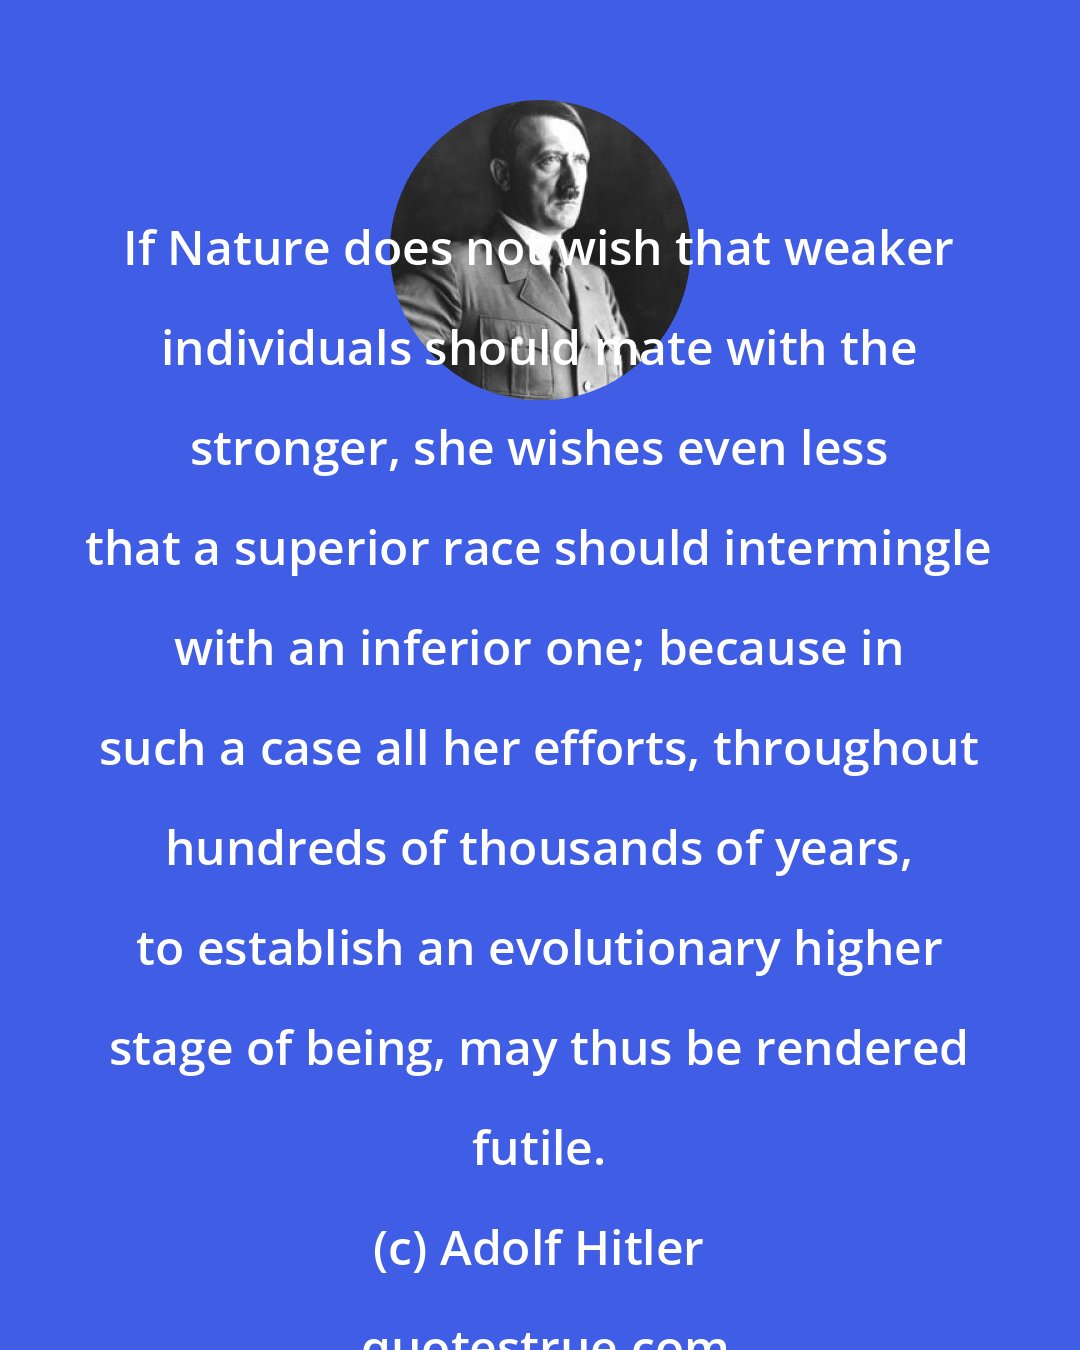 Adolf Hitler: If Nature does not wish that weaker individuals should mate with the stronger, she wishes even less that a superior race should intermingle with an inferior one; because in such a case all her efforts, throughout hundreds of thousands of years, to establish an evolutionary higher stage of being, may thus be rendered futile.